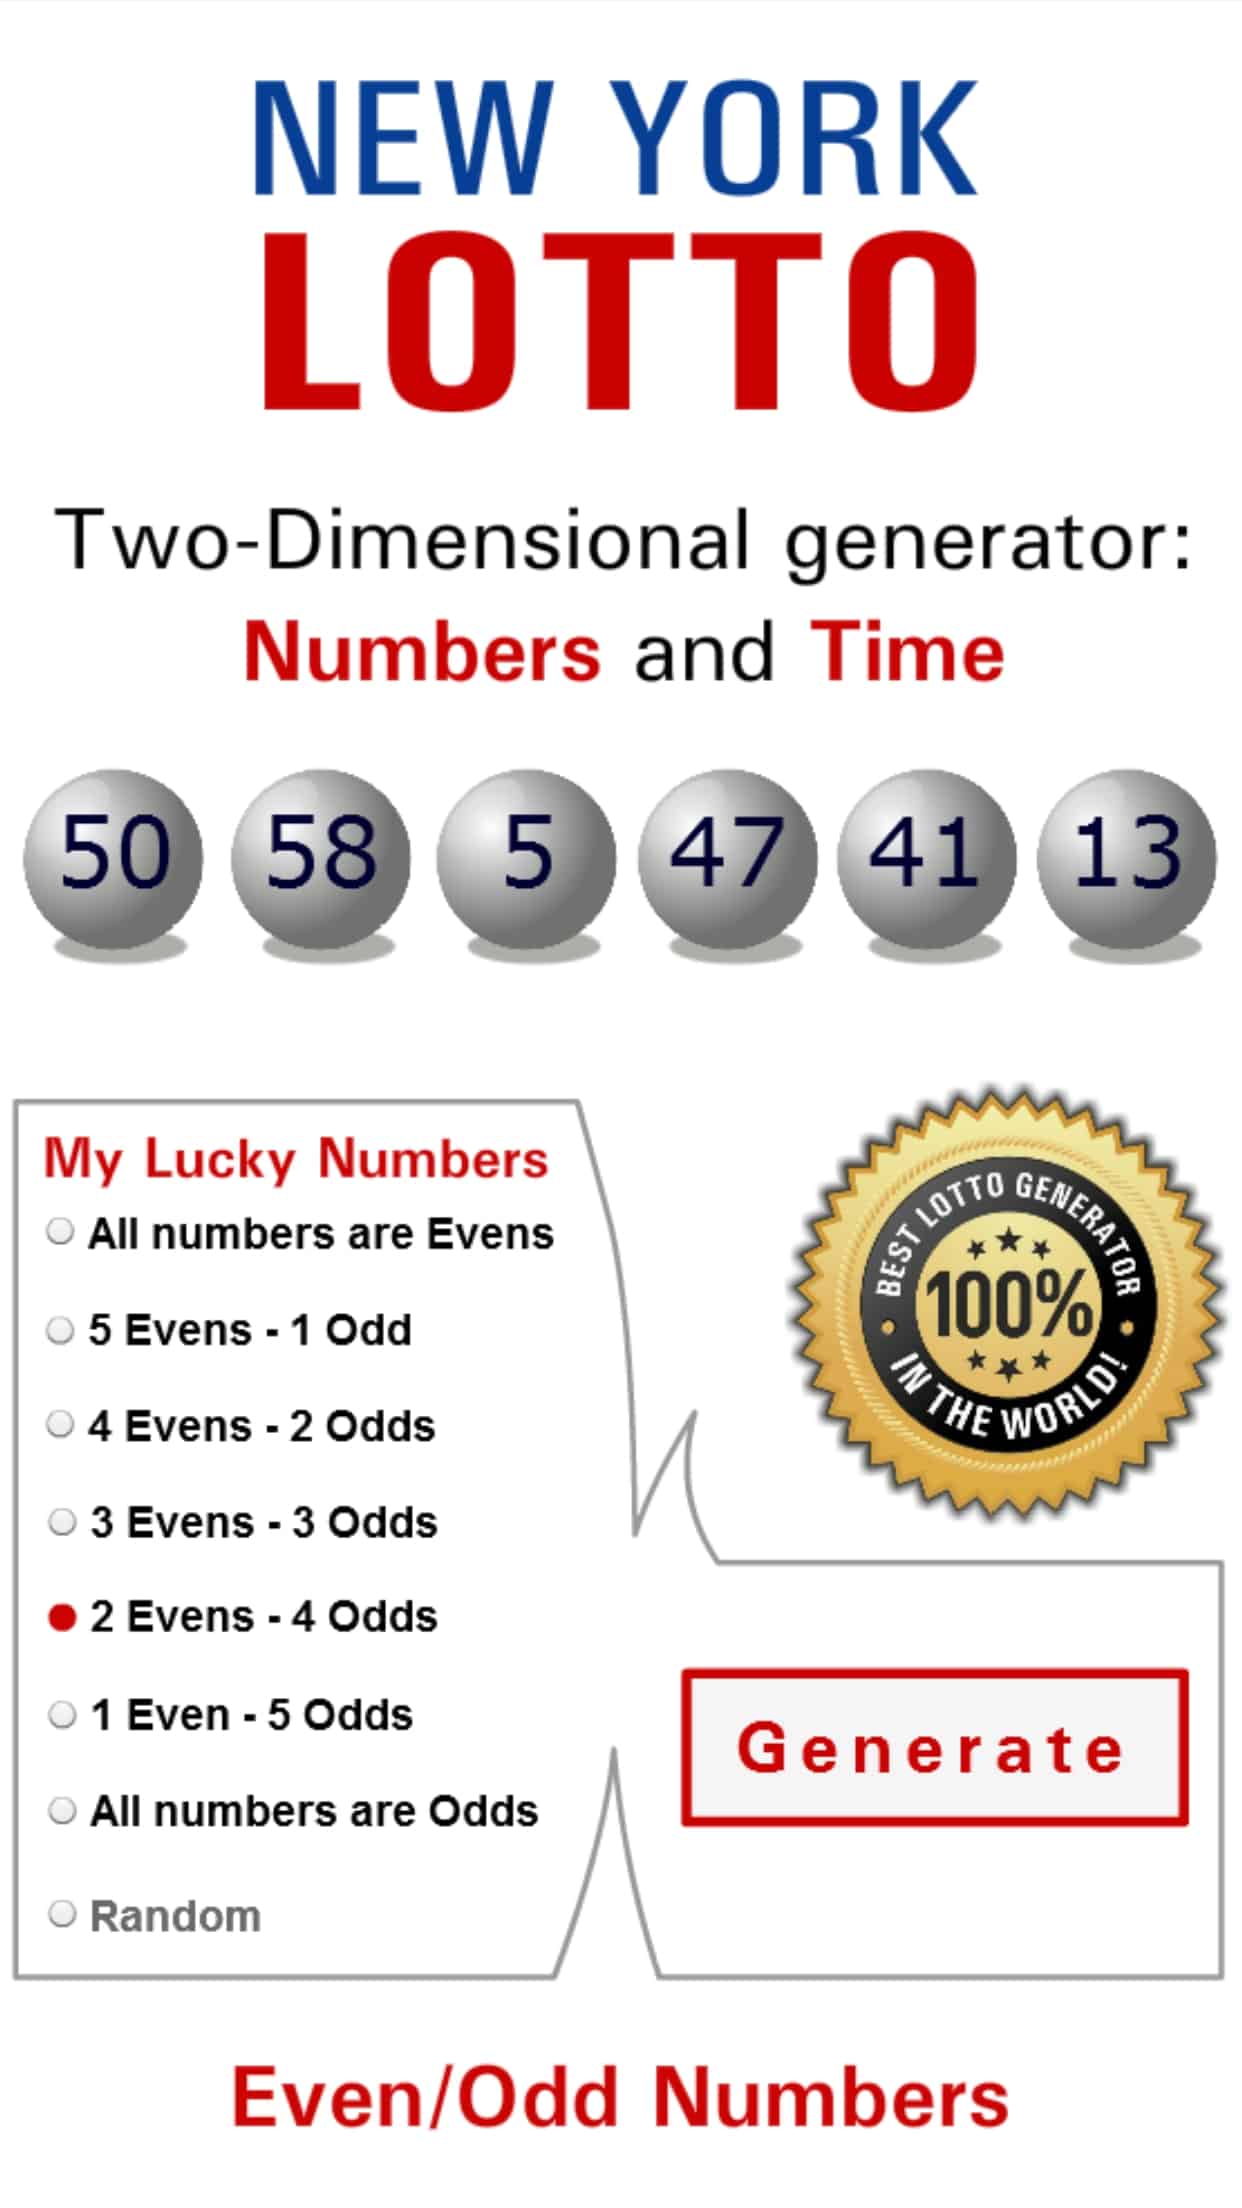 New York Lottery (NY Lottery) – Winning Numbers, Results & Tips for NY lottery